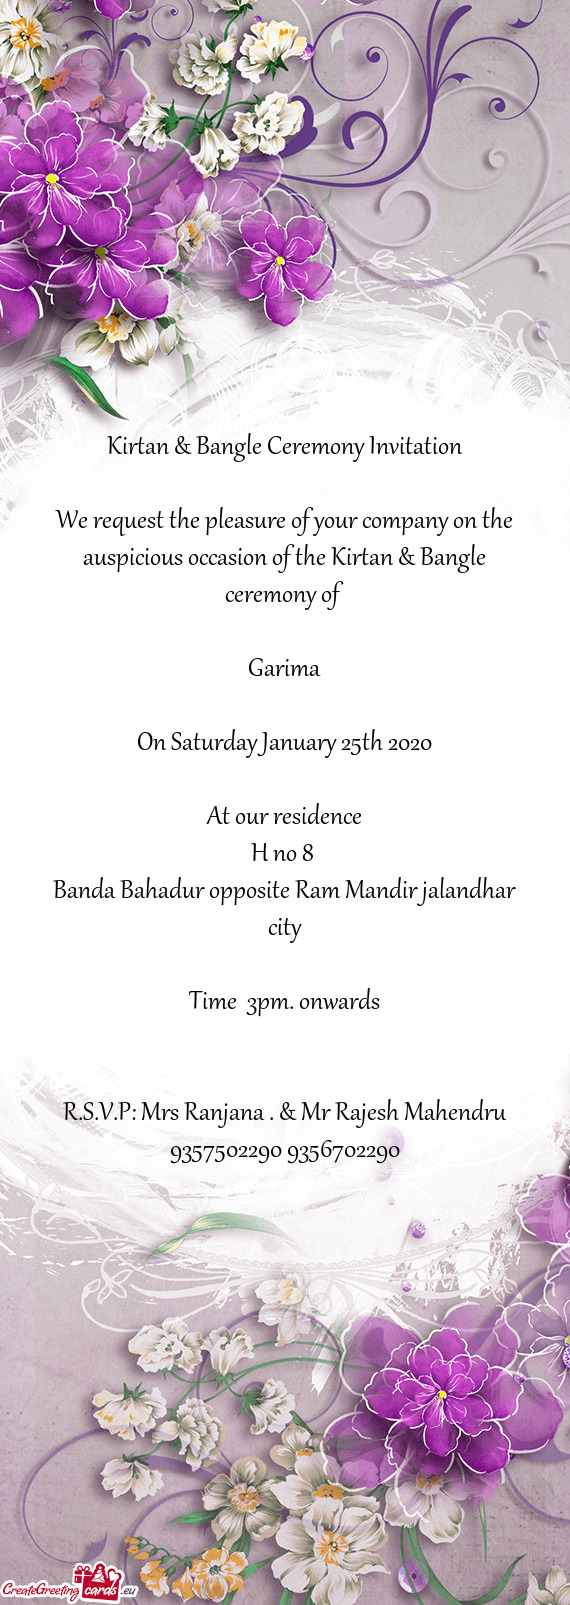 We request the pleasure of your company on the auspicious occasion of the Kirtan & Bangle ceremony o